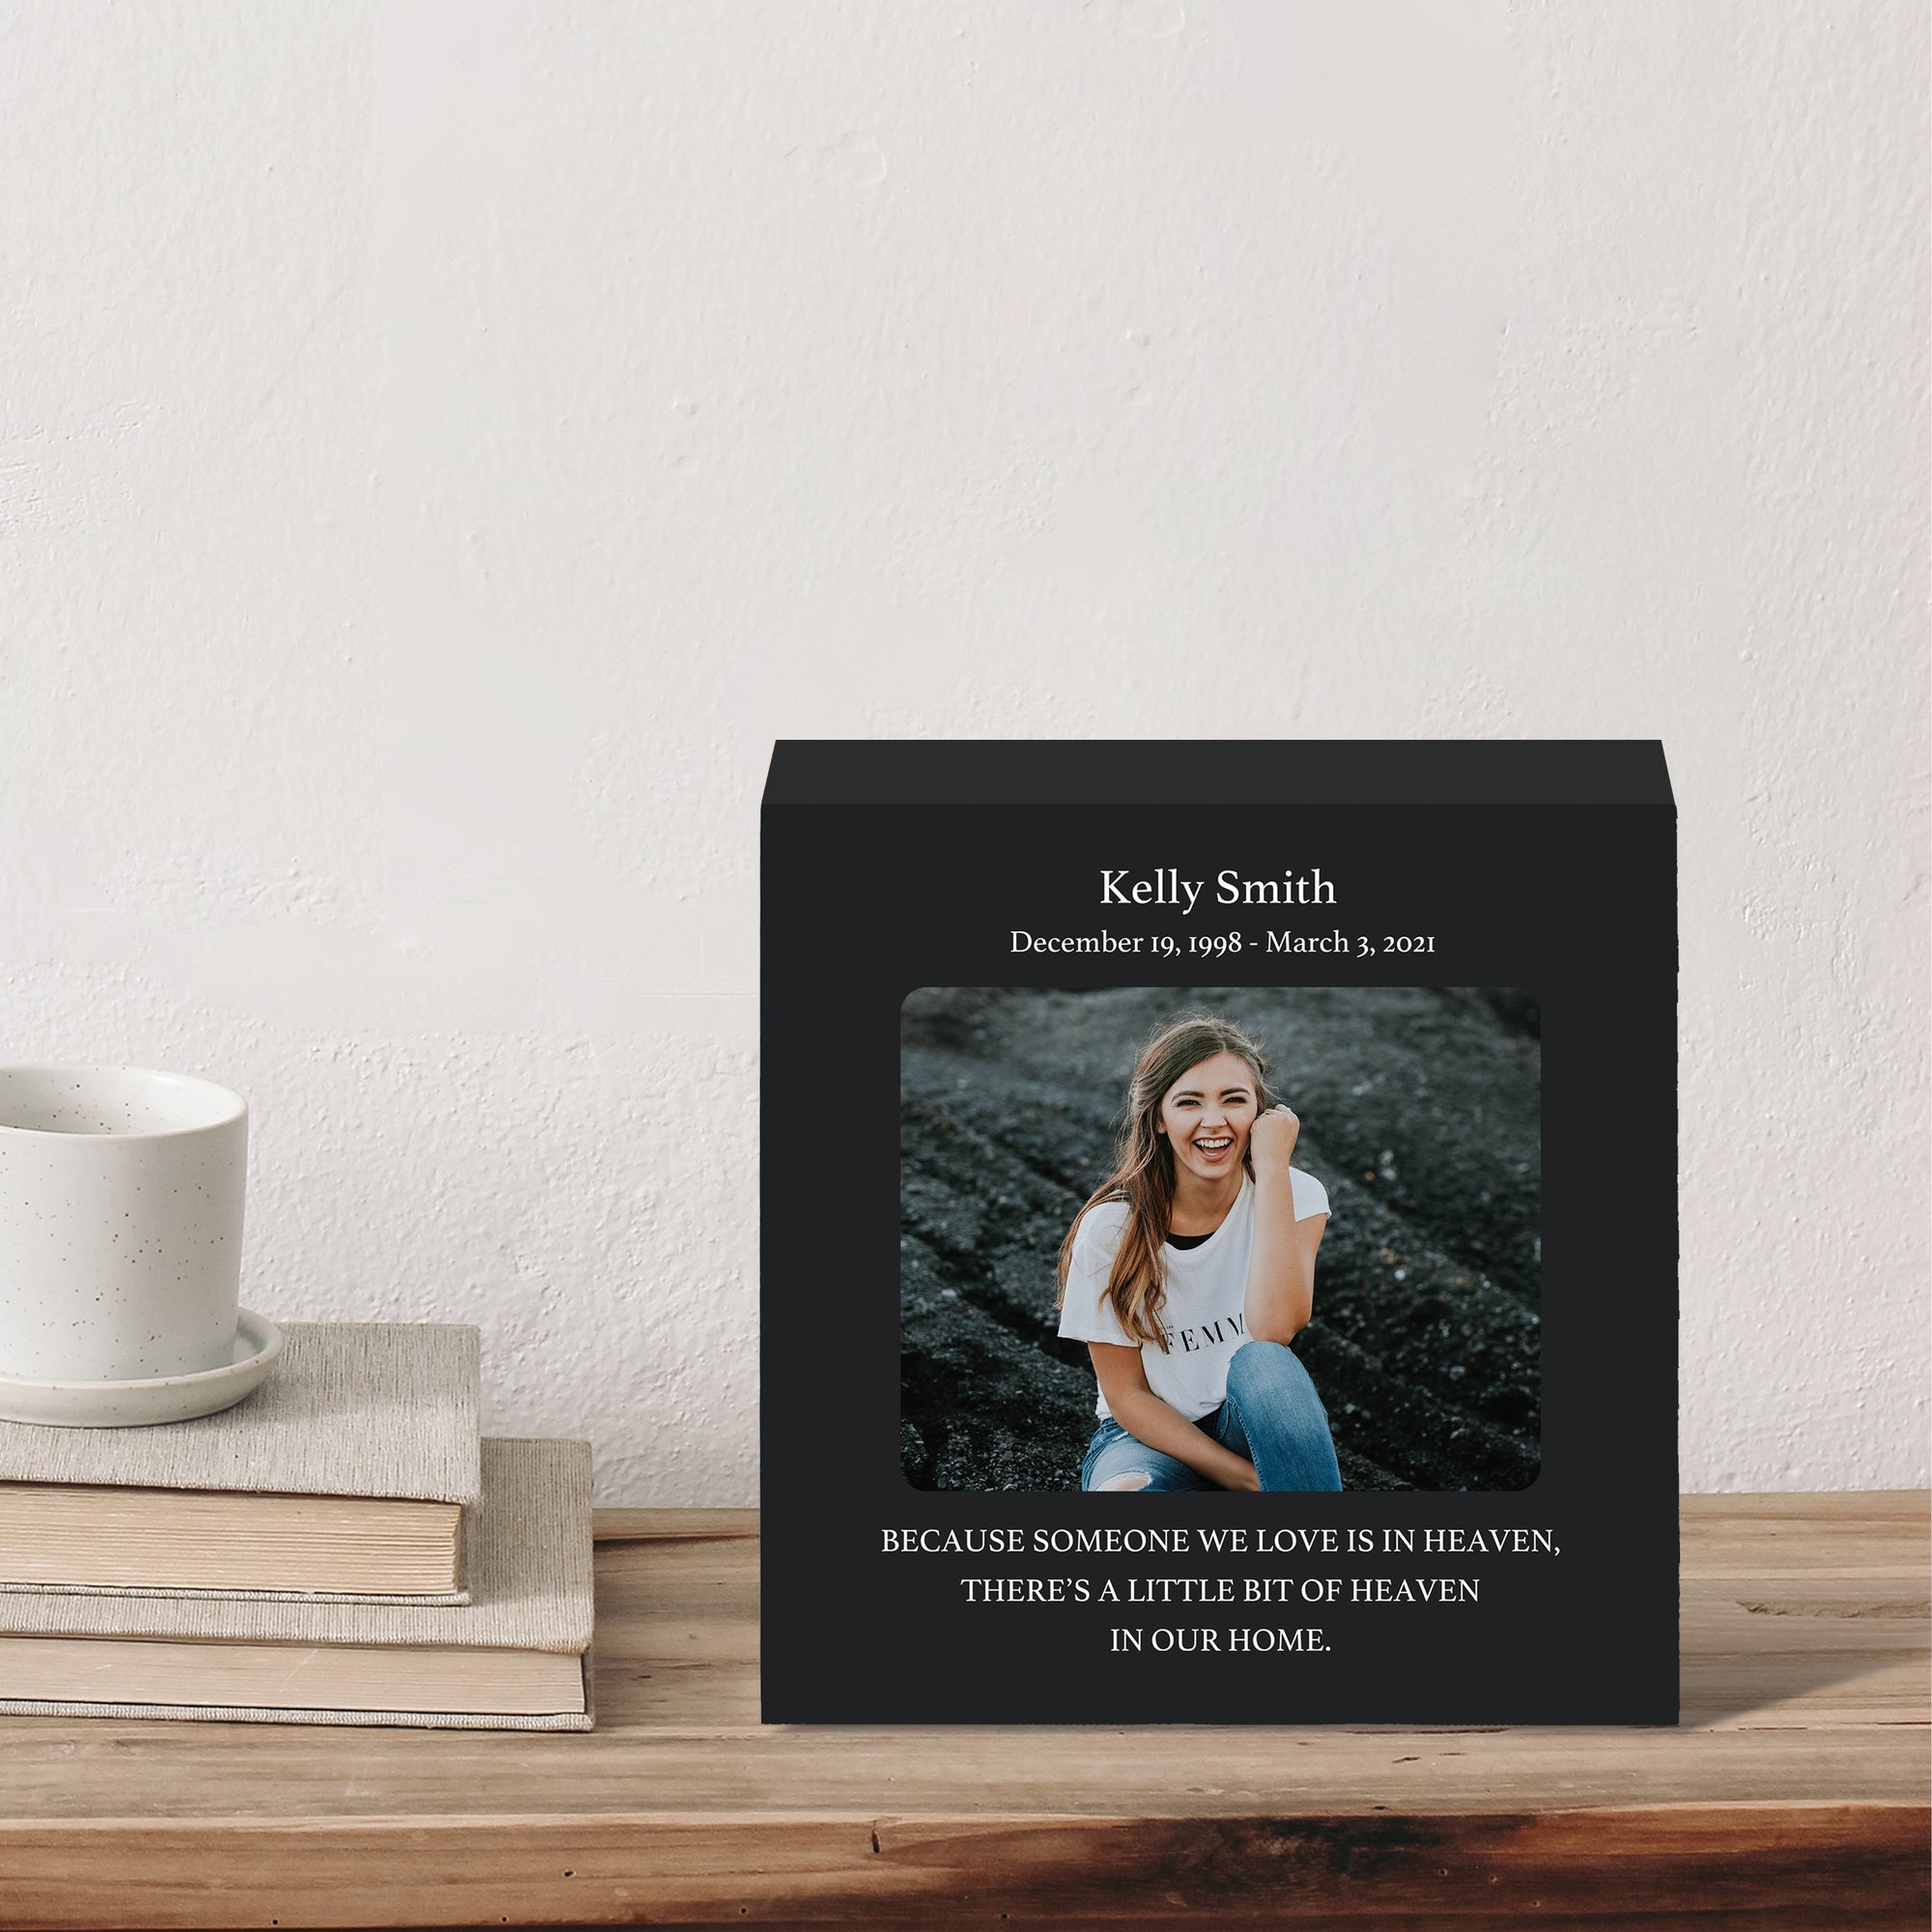 Timeless Human Memorial Shadow Box Photo Urn in Black - Because Someone We Love